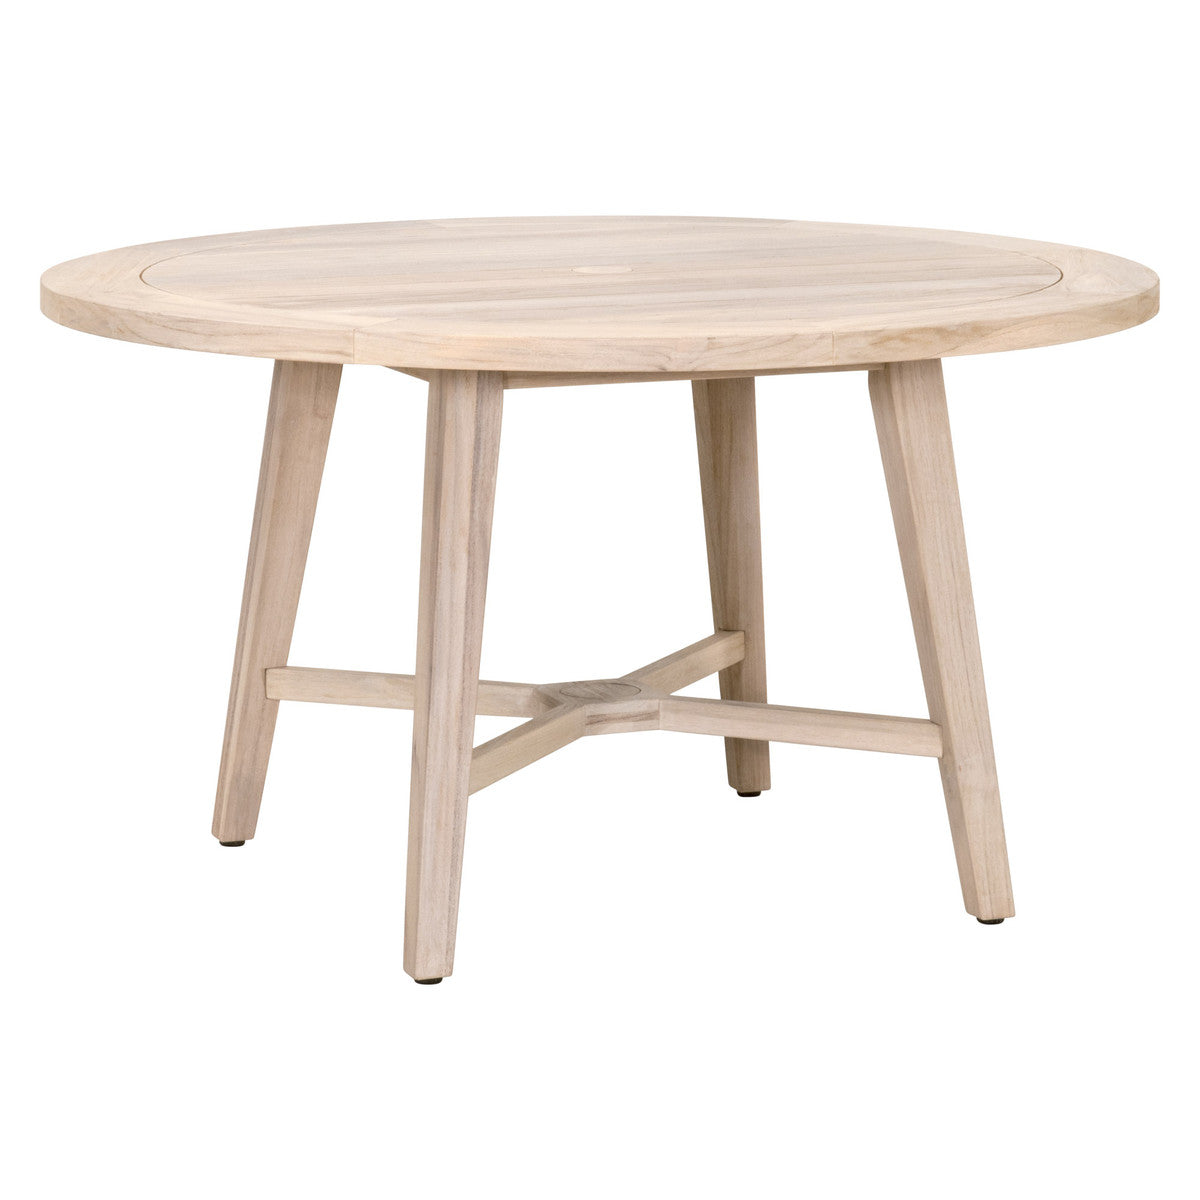 Carmel Outdoor 54" Round Dining Table in Gray Teak - 6825-RD.GT